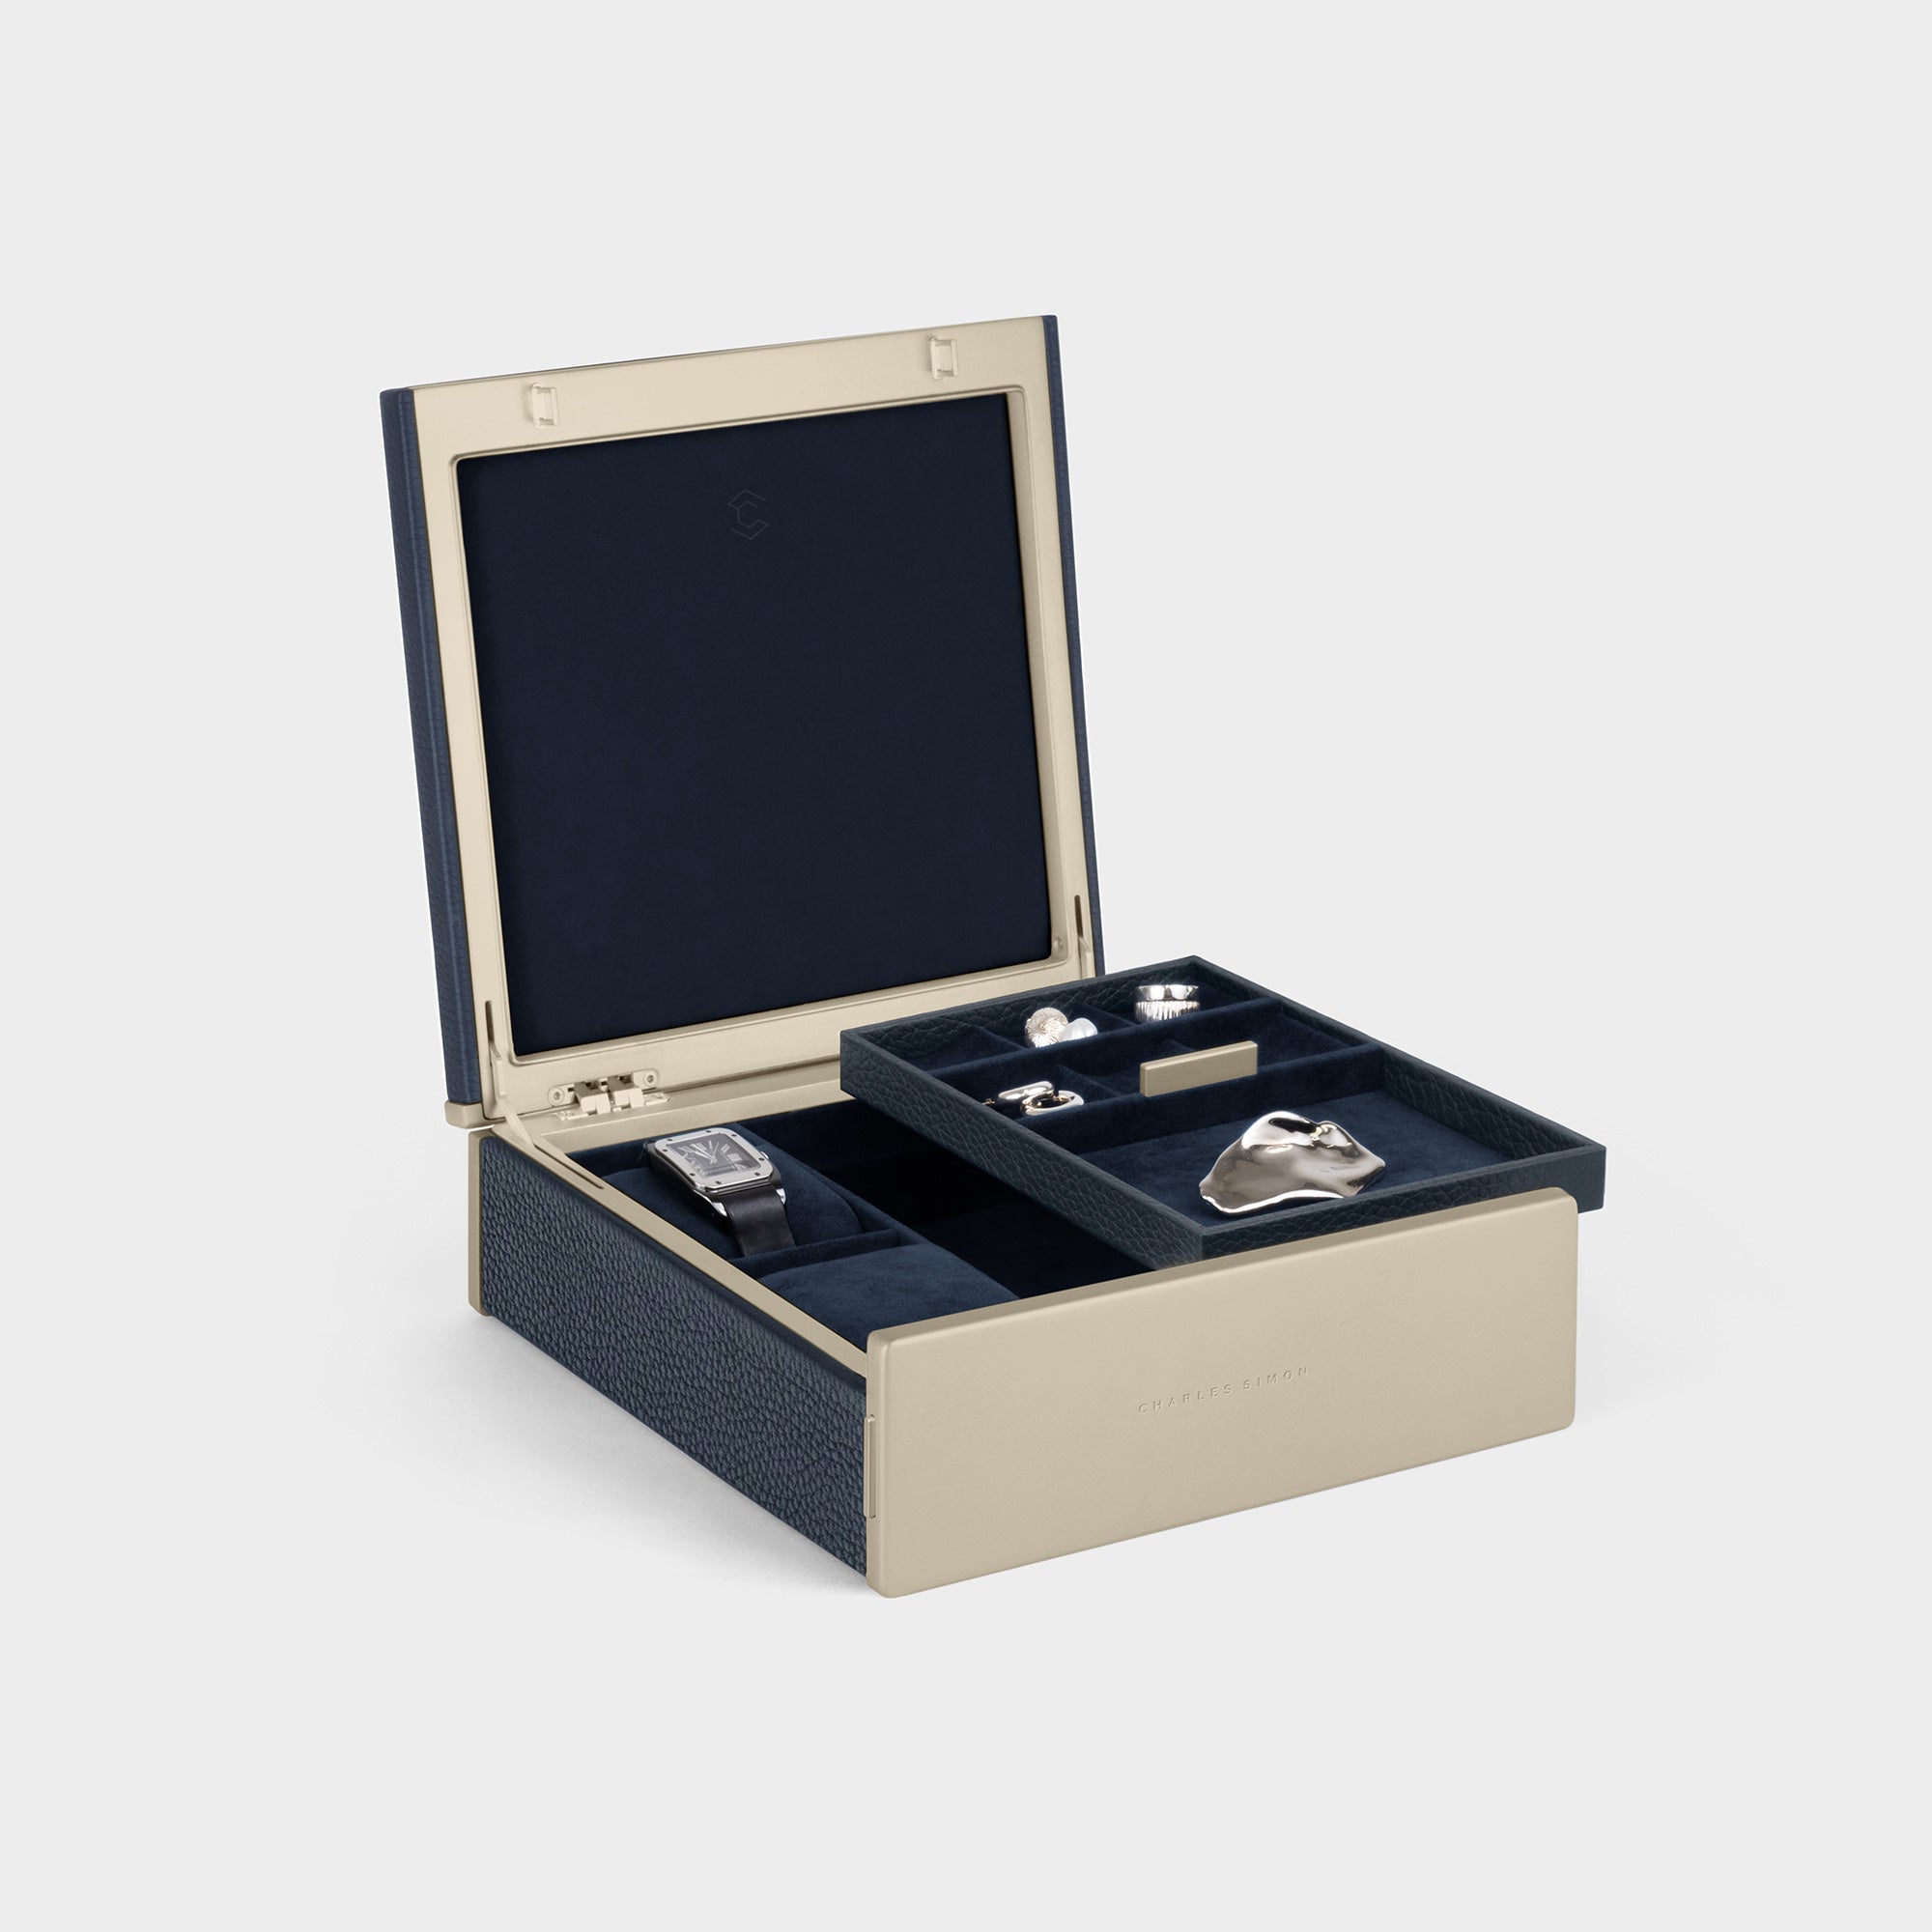 Charles Simon Taylor 2 Watch and Jewelry box in gold anodized aluminum and carbon fiber framing and marine leather. The watch and jewelry box features a removable jewelry tray for conveniently organizing and storing your rings, bracelets, necklaces, rings and more